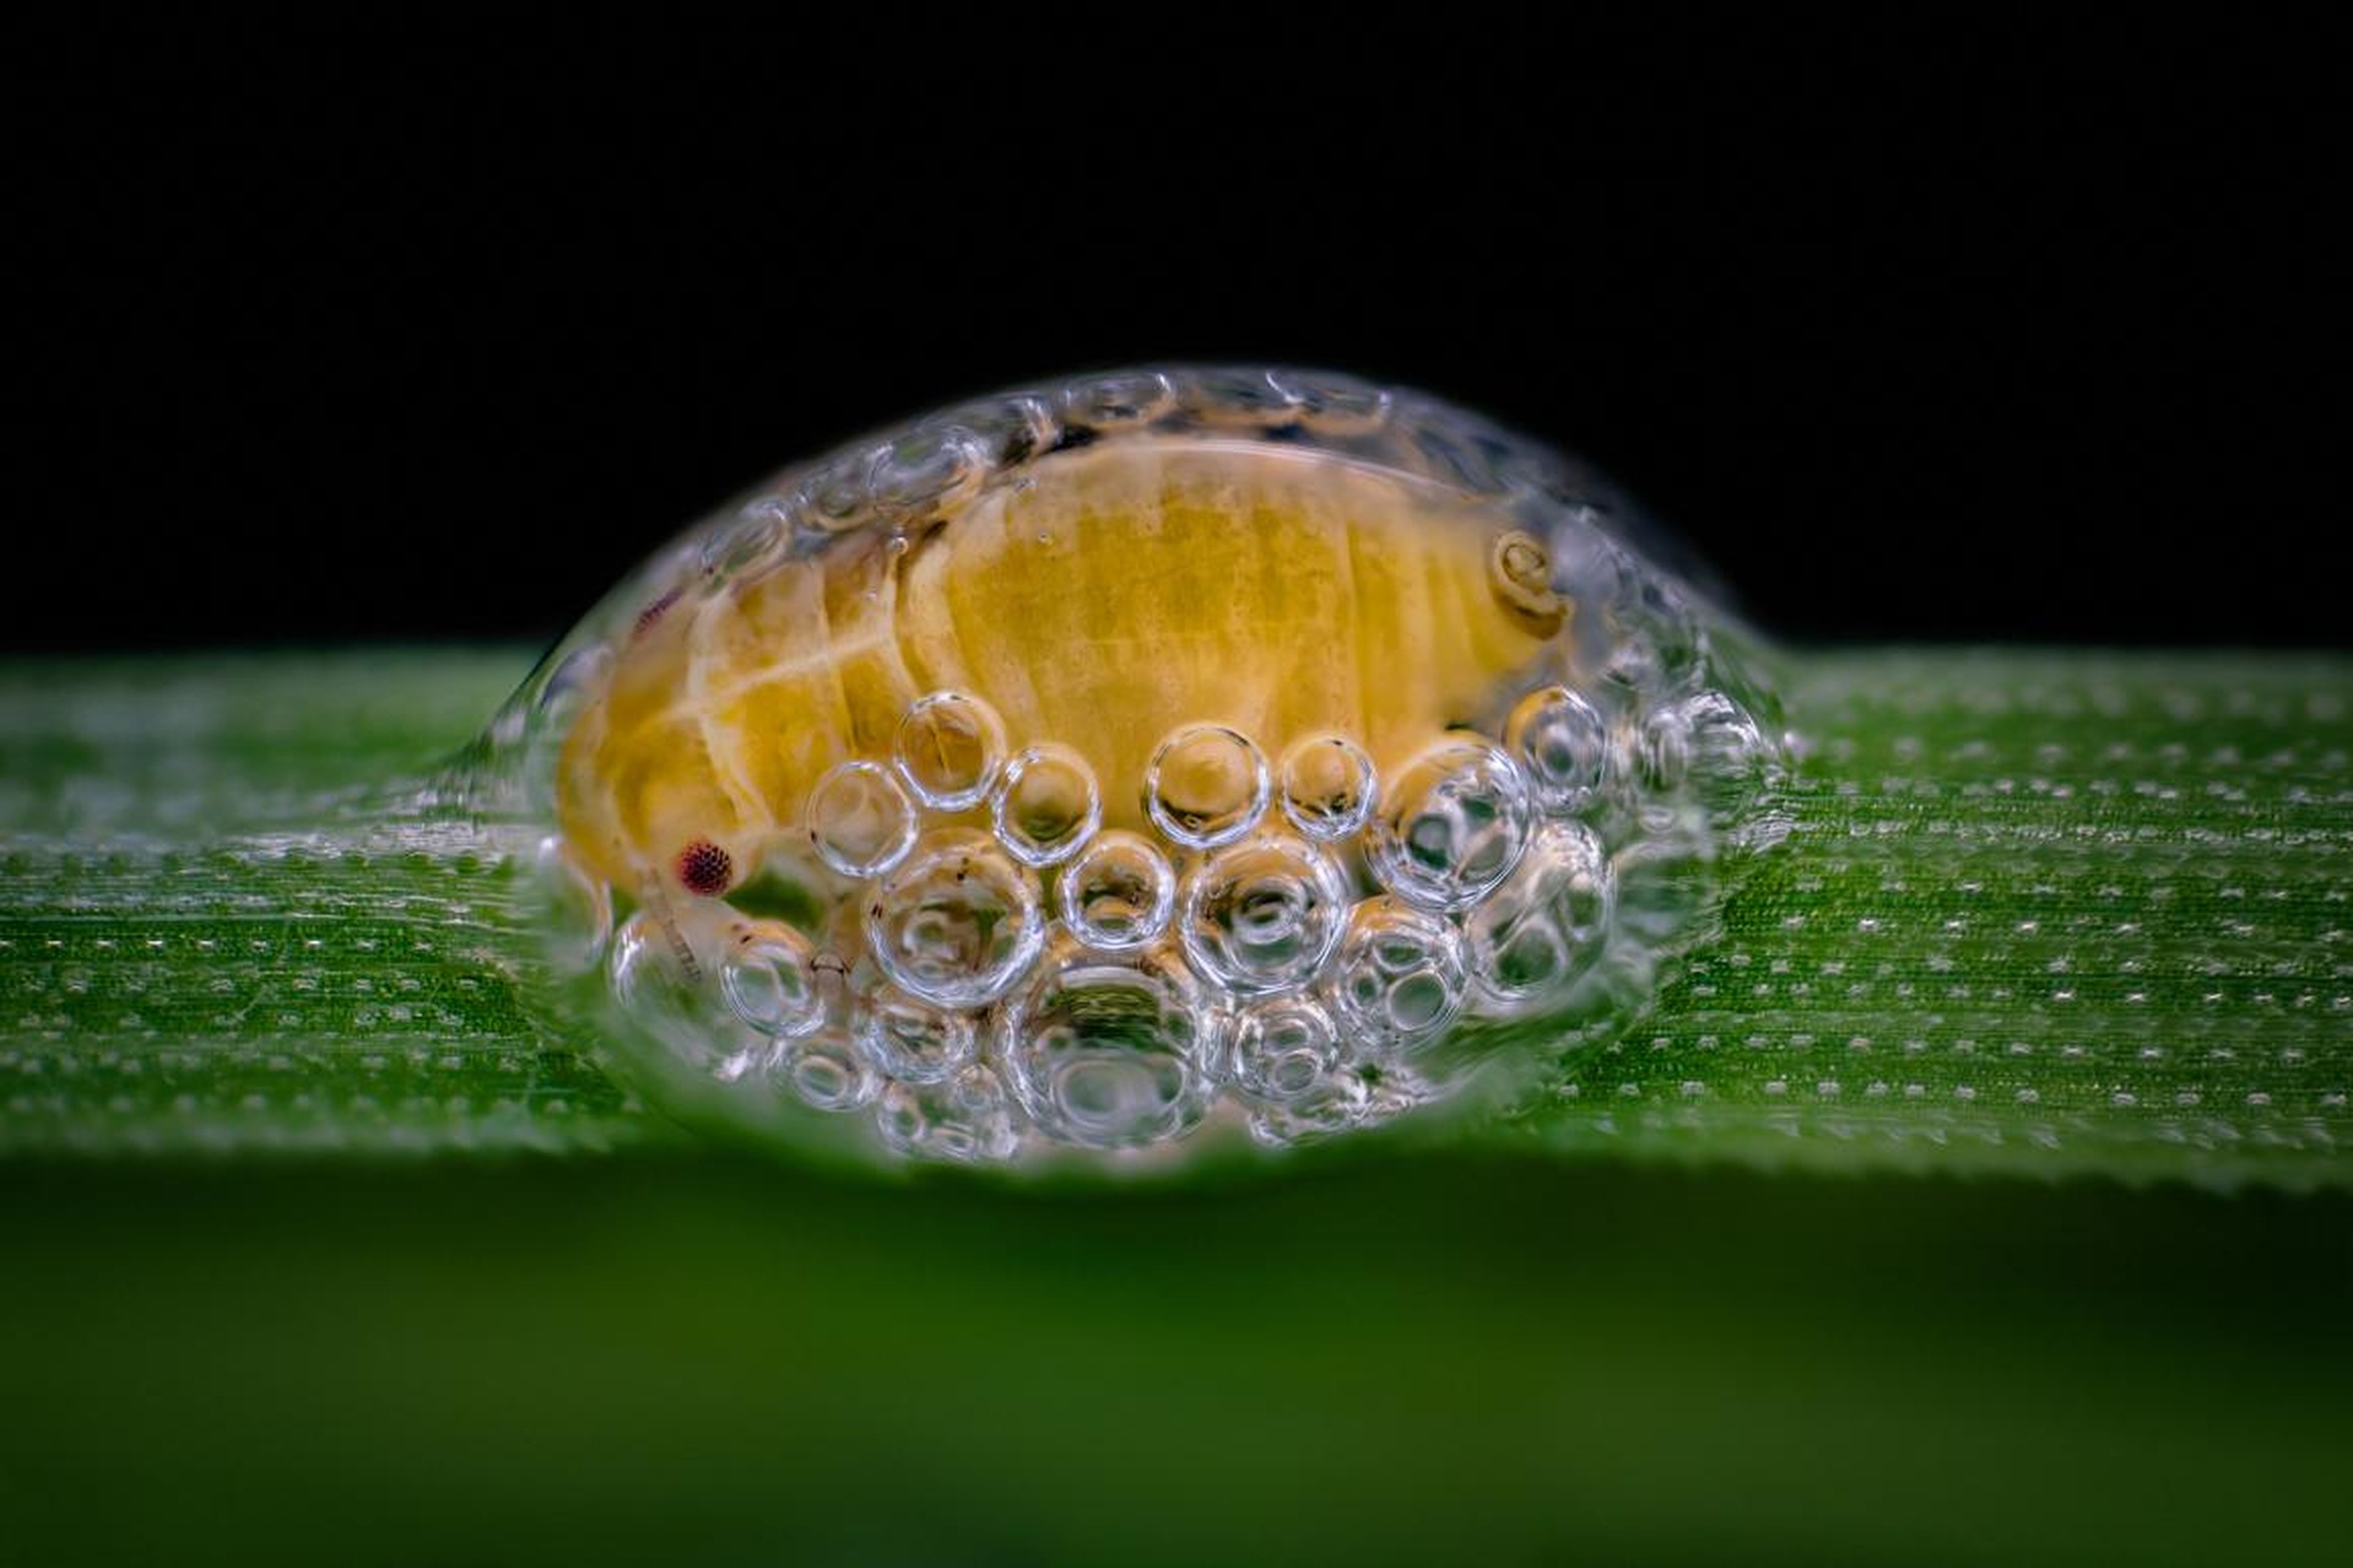 This is third place: a spittlebug nymph huddling inside a protective coat of bubbles.